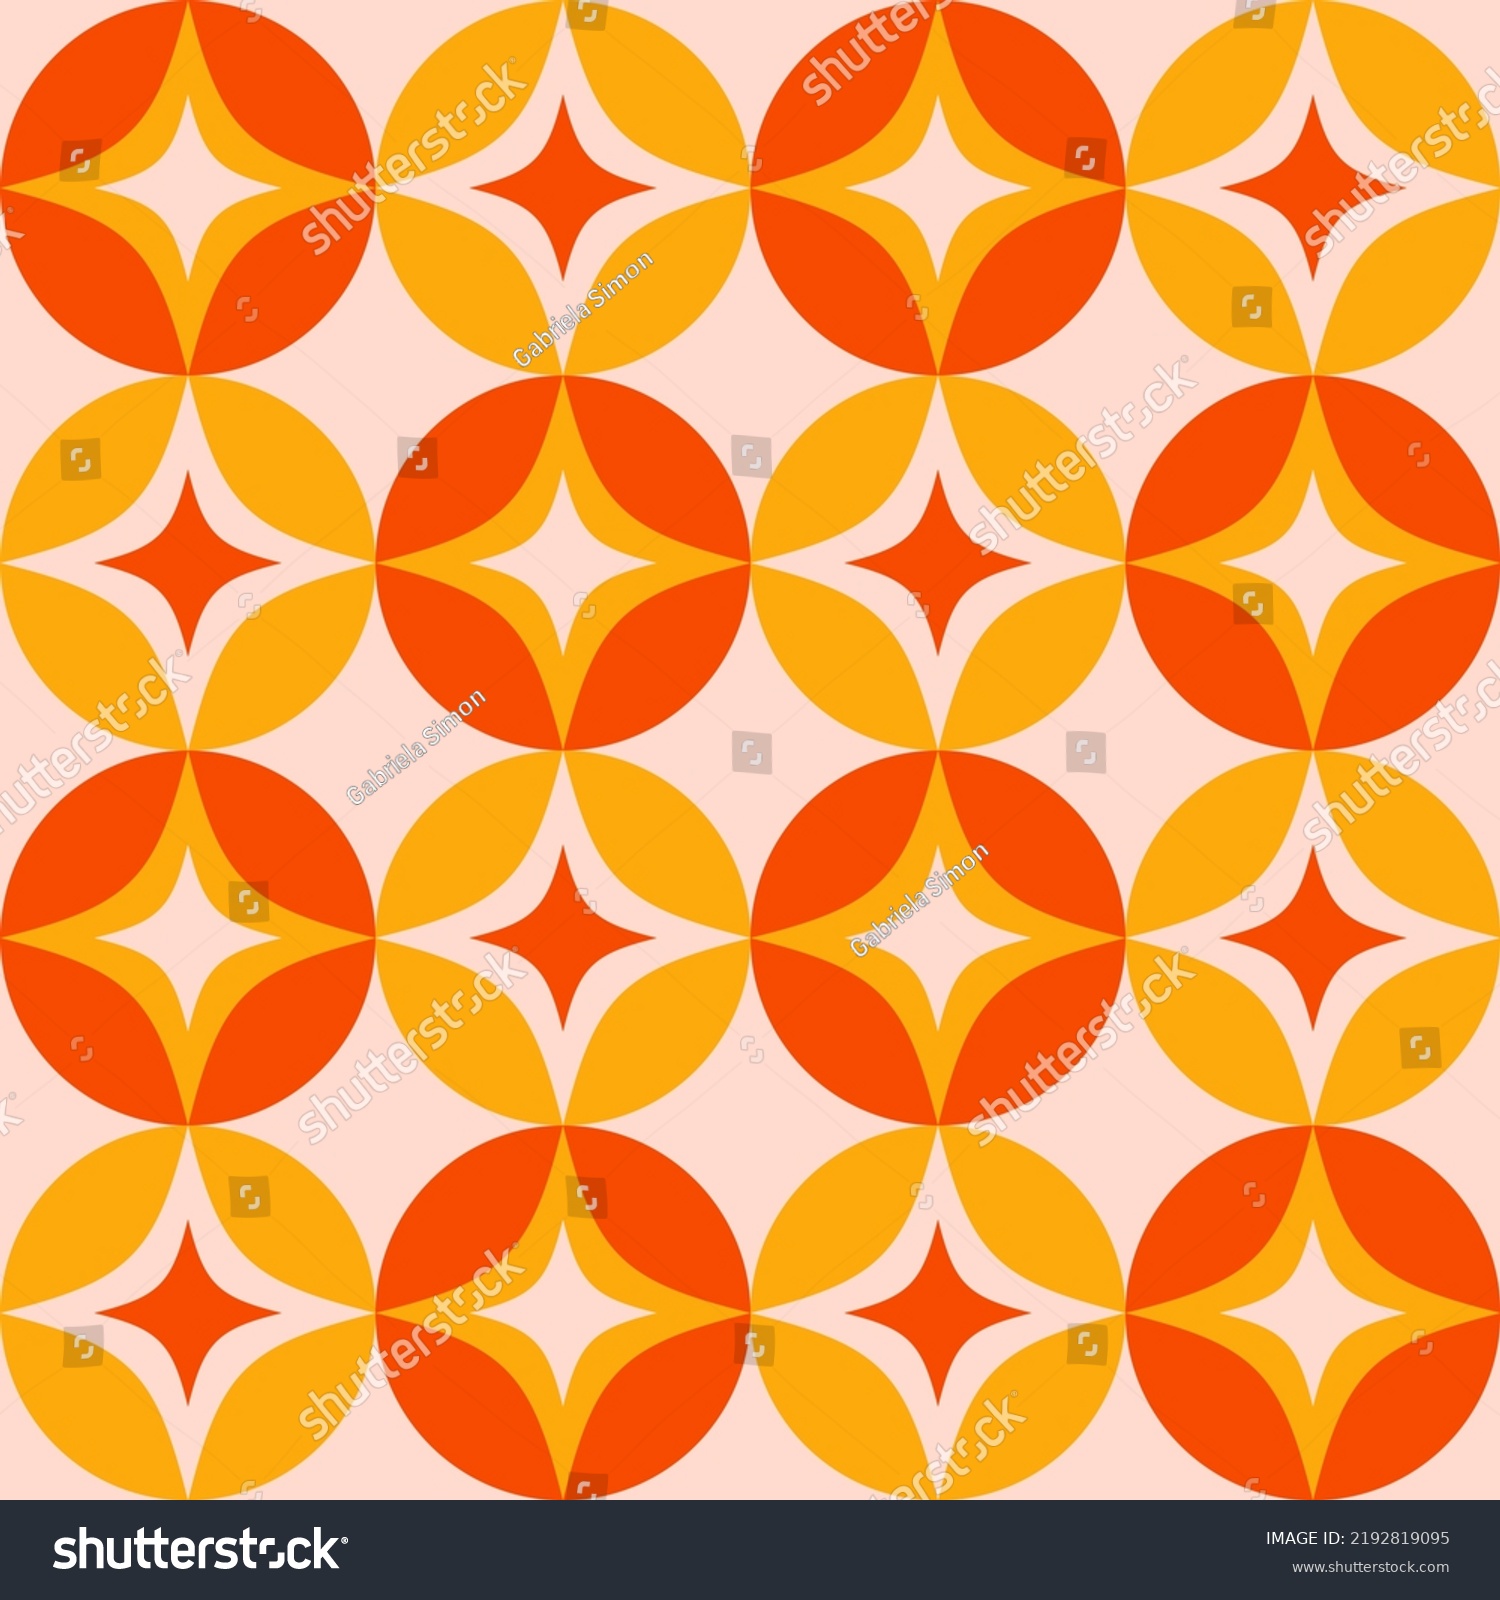 SVG of Retro Atomic Age Style Pattern Design With Stars And Circles. Orange And Red Retro Mid Century Modern Geometric Seamless Pattern. svg